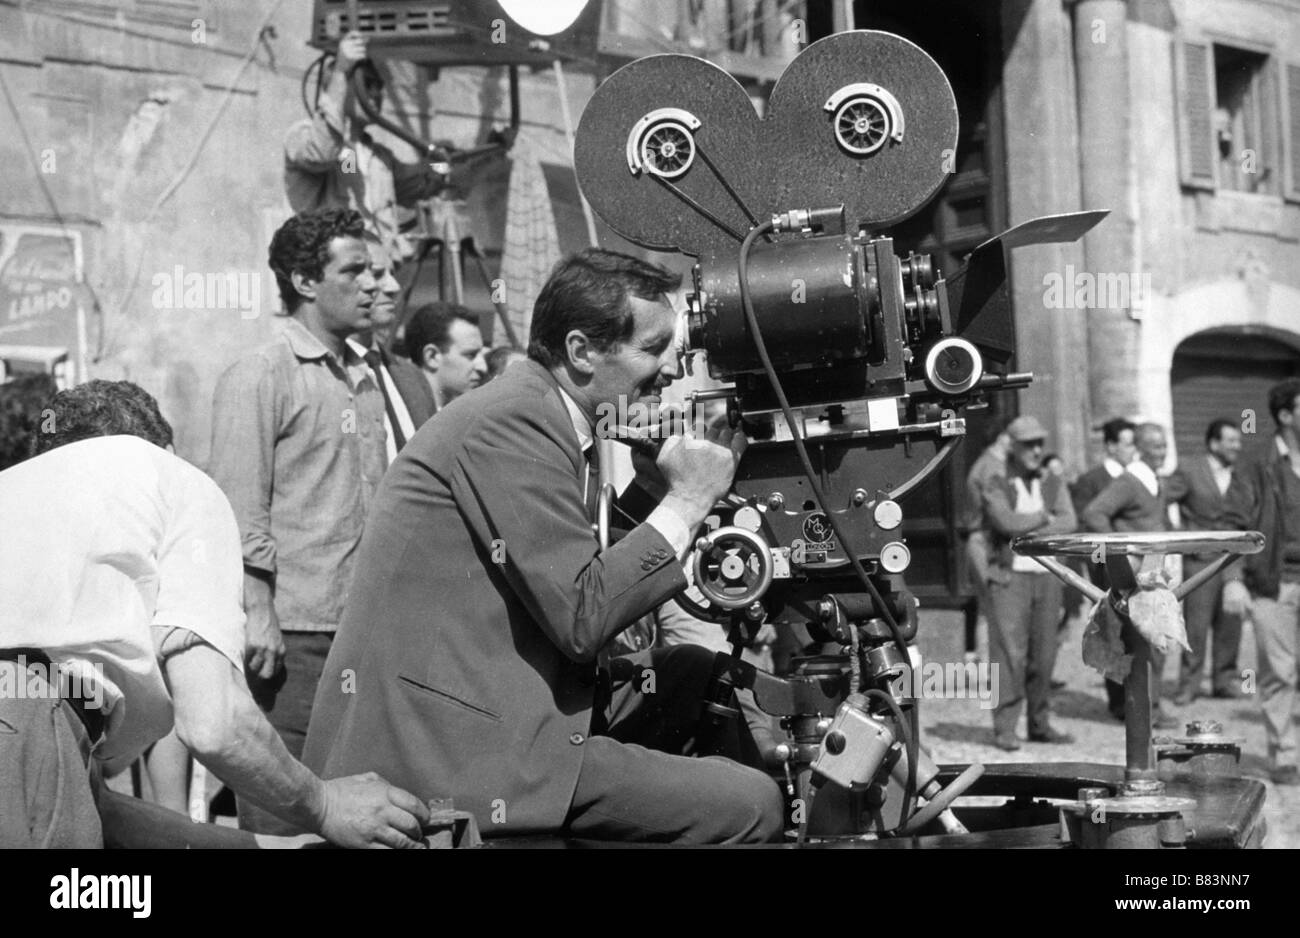 Pietro Germi Pietro Germi Pietro Germi on the set of Ferroviere, Il  Year: 1956 - Italy Tournage 'Le disque rouge' ou 'Le cheminot' Stock Photo